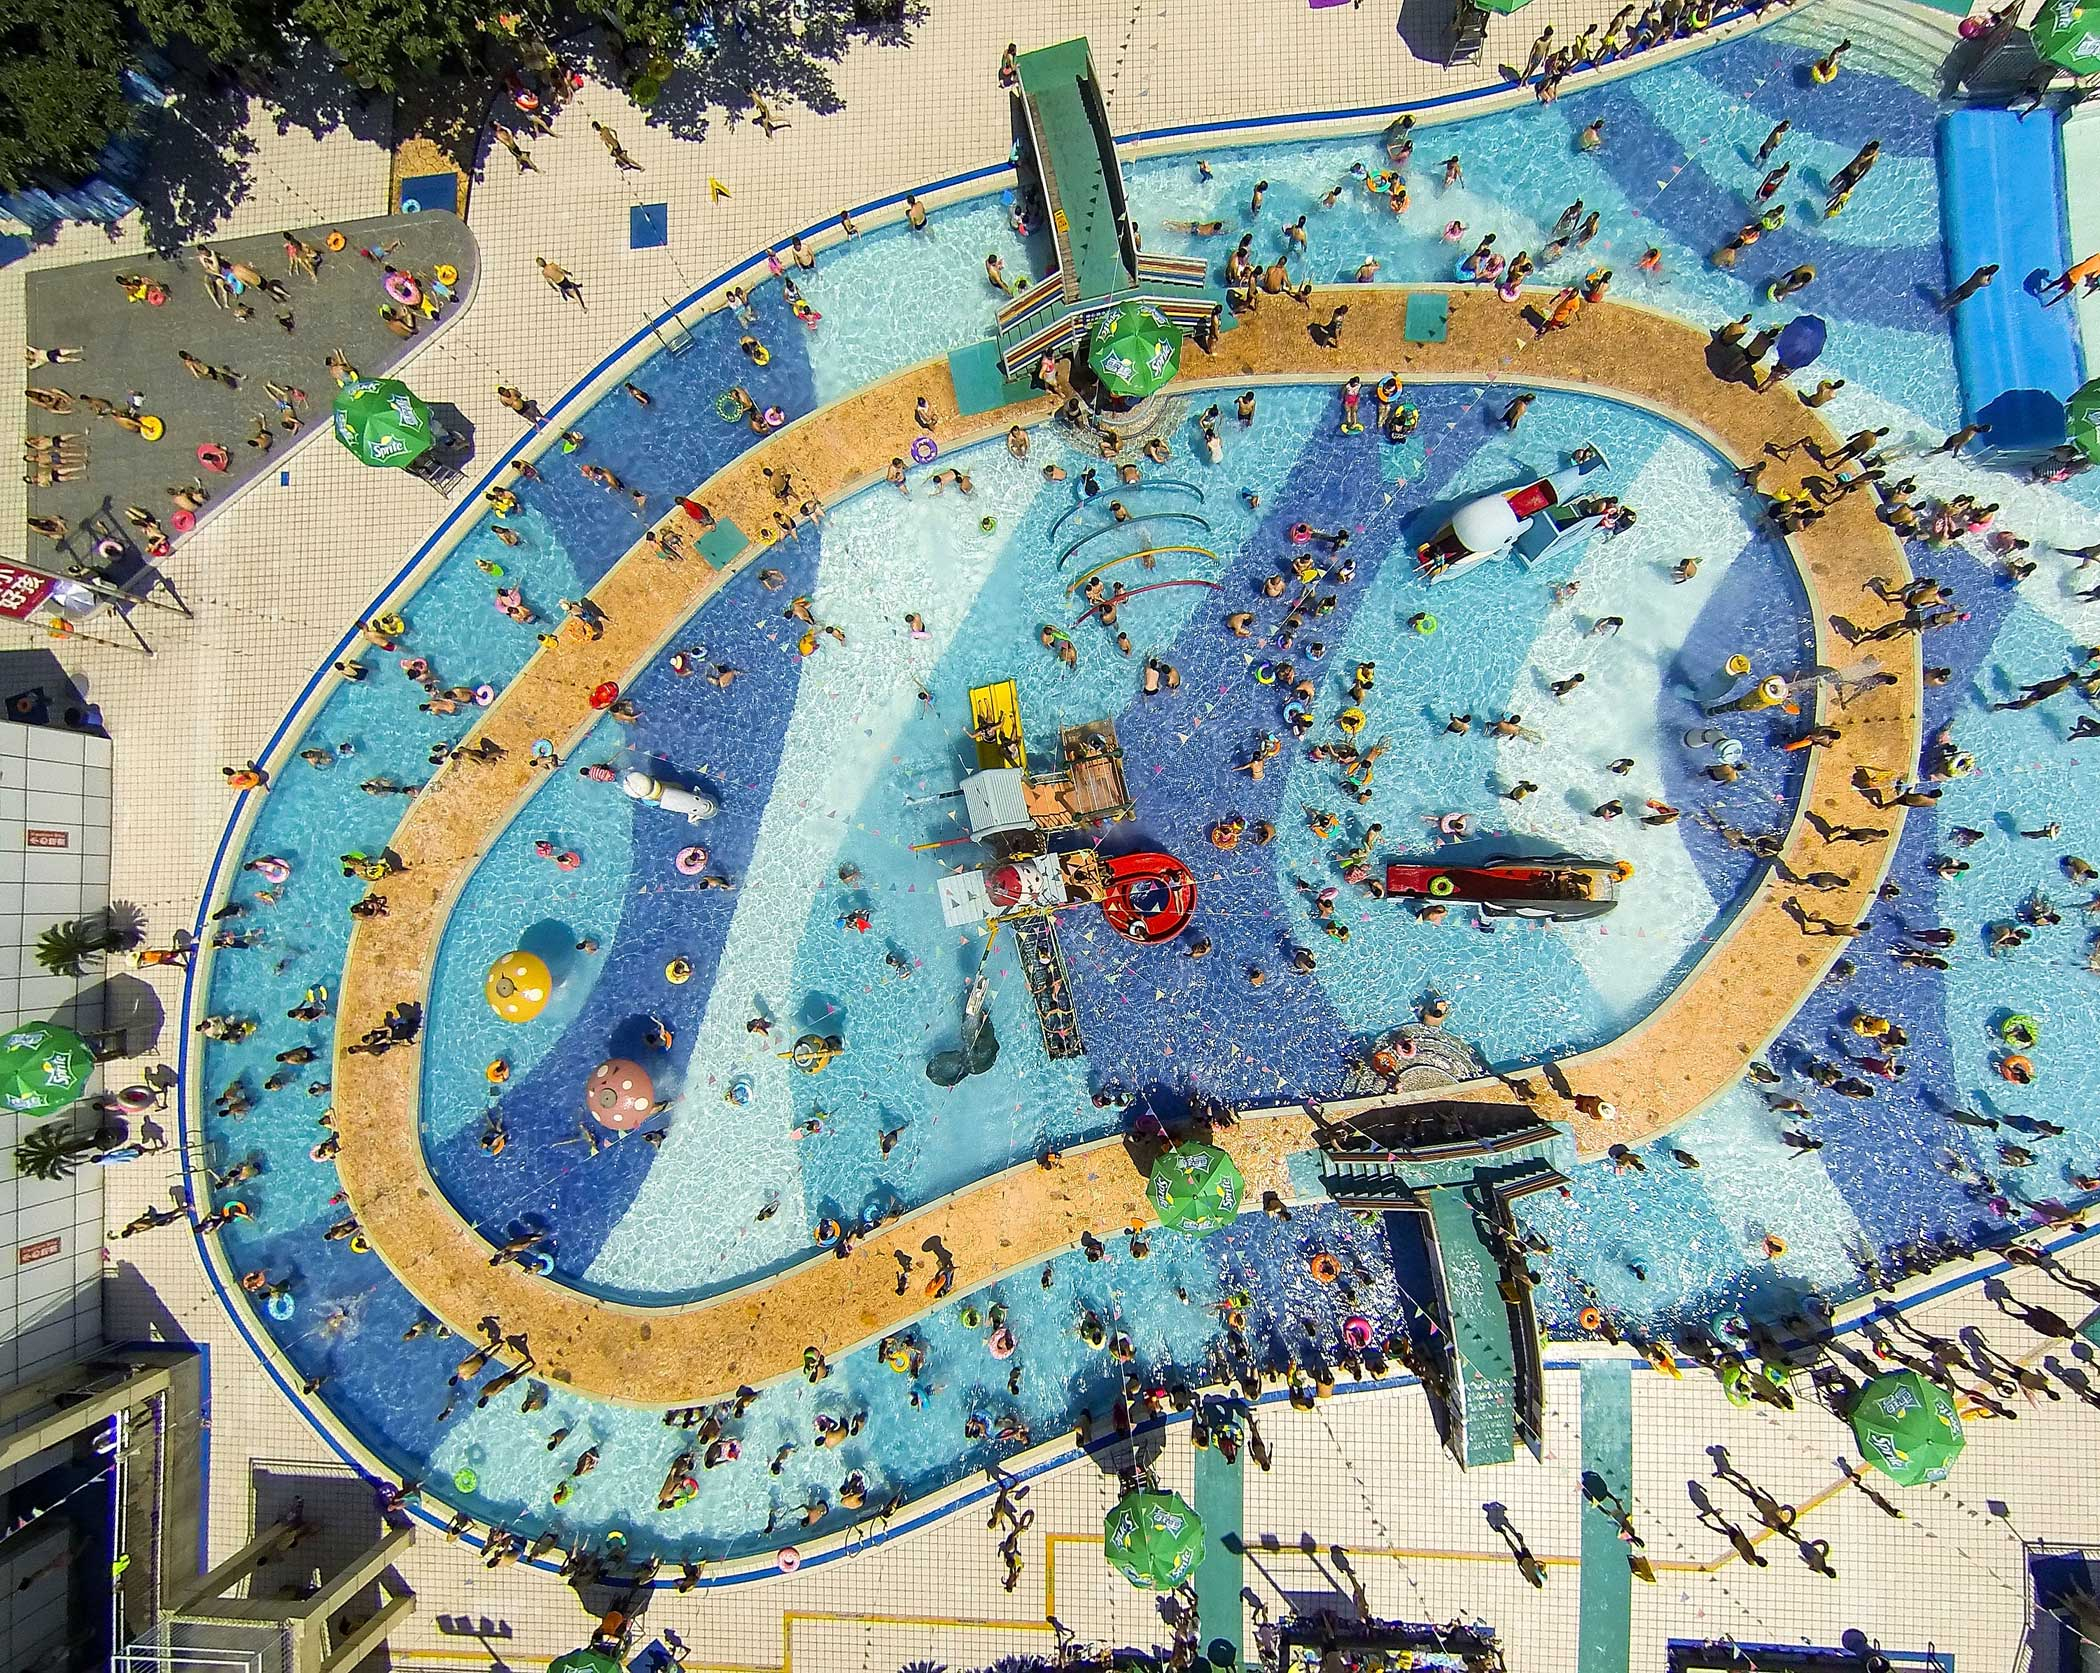 An overhead view of a pool in China.